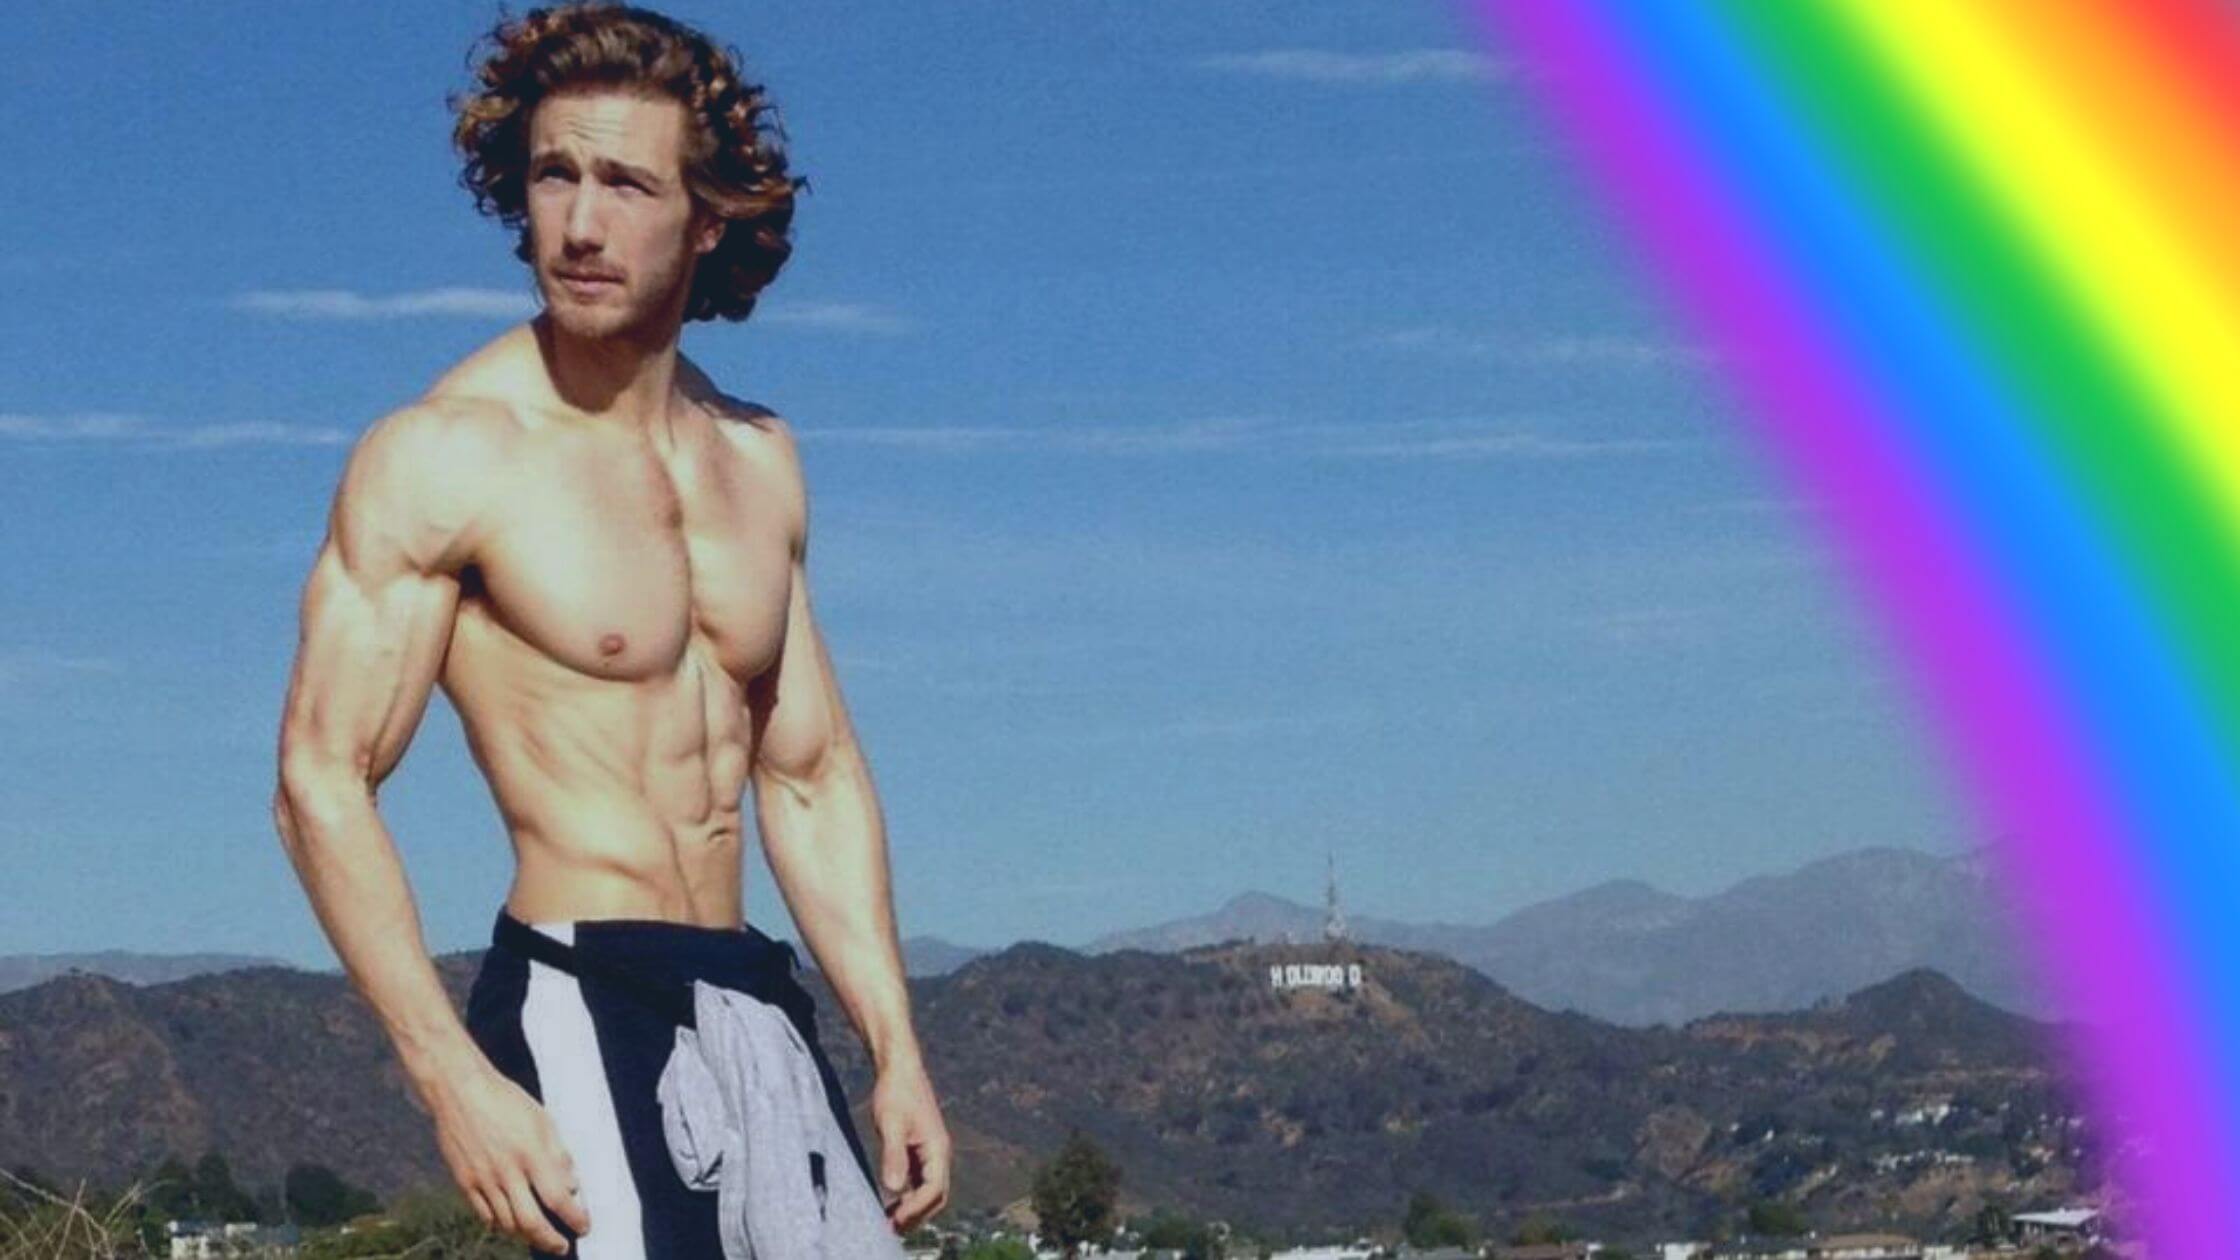 Eugenio siller is he gay